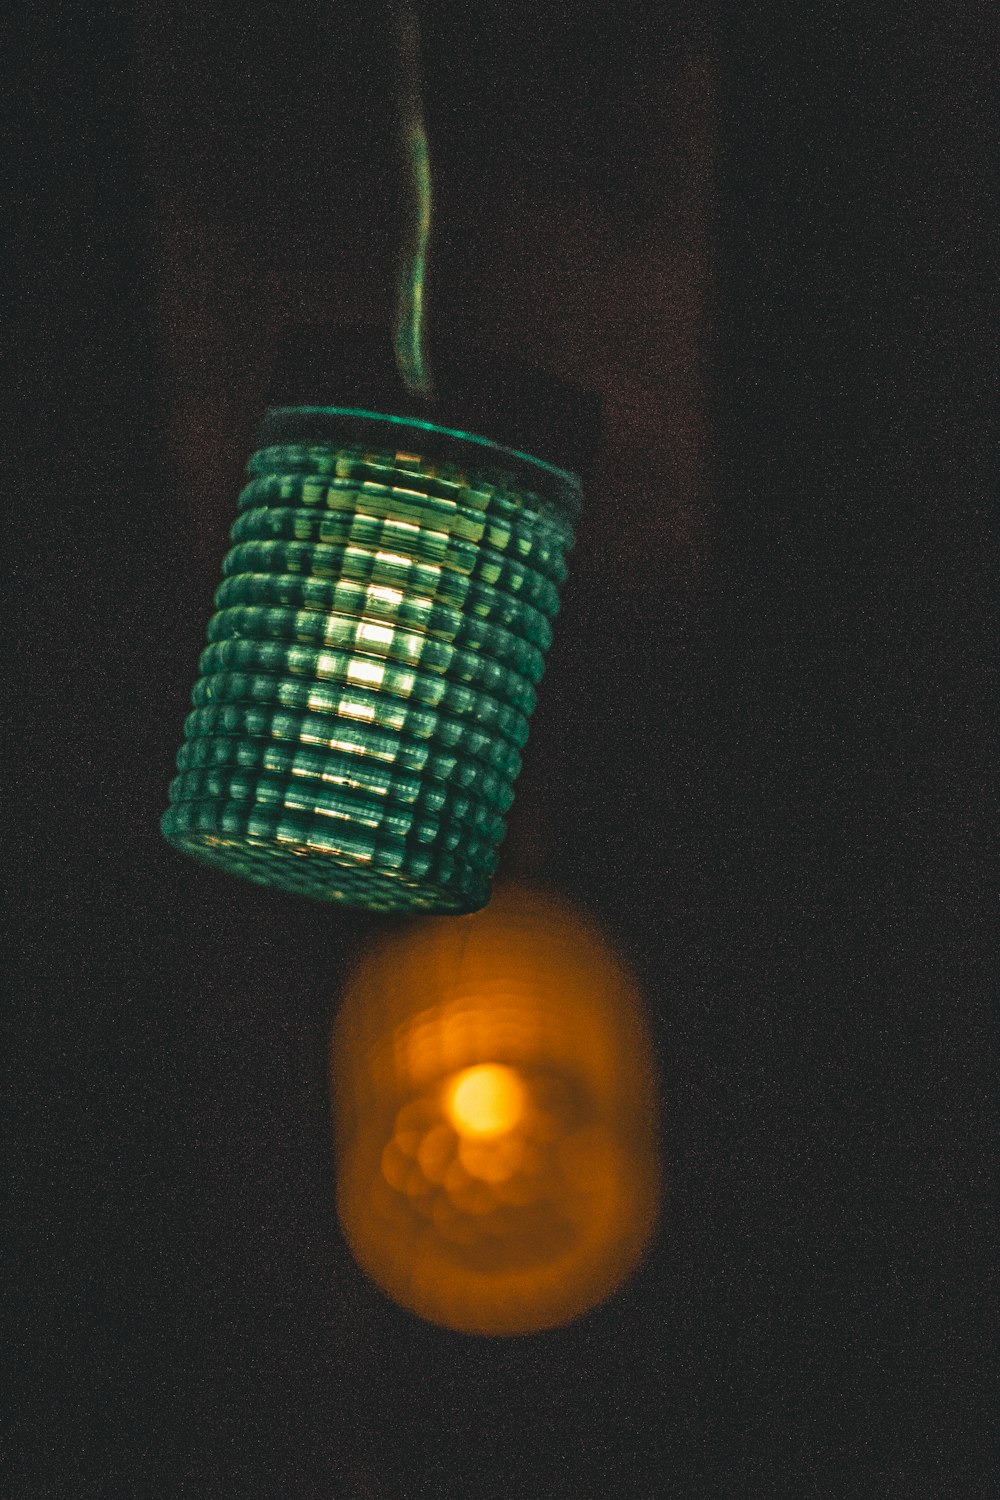 a green glass hanging from a hook in a dark room